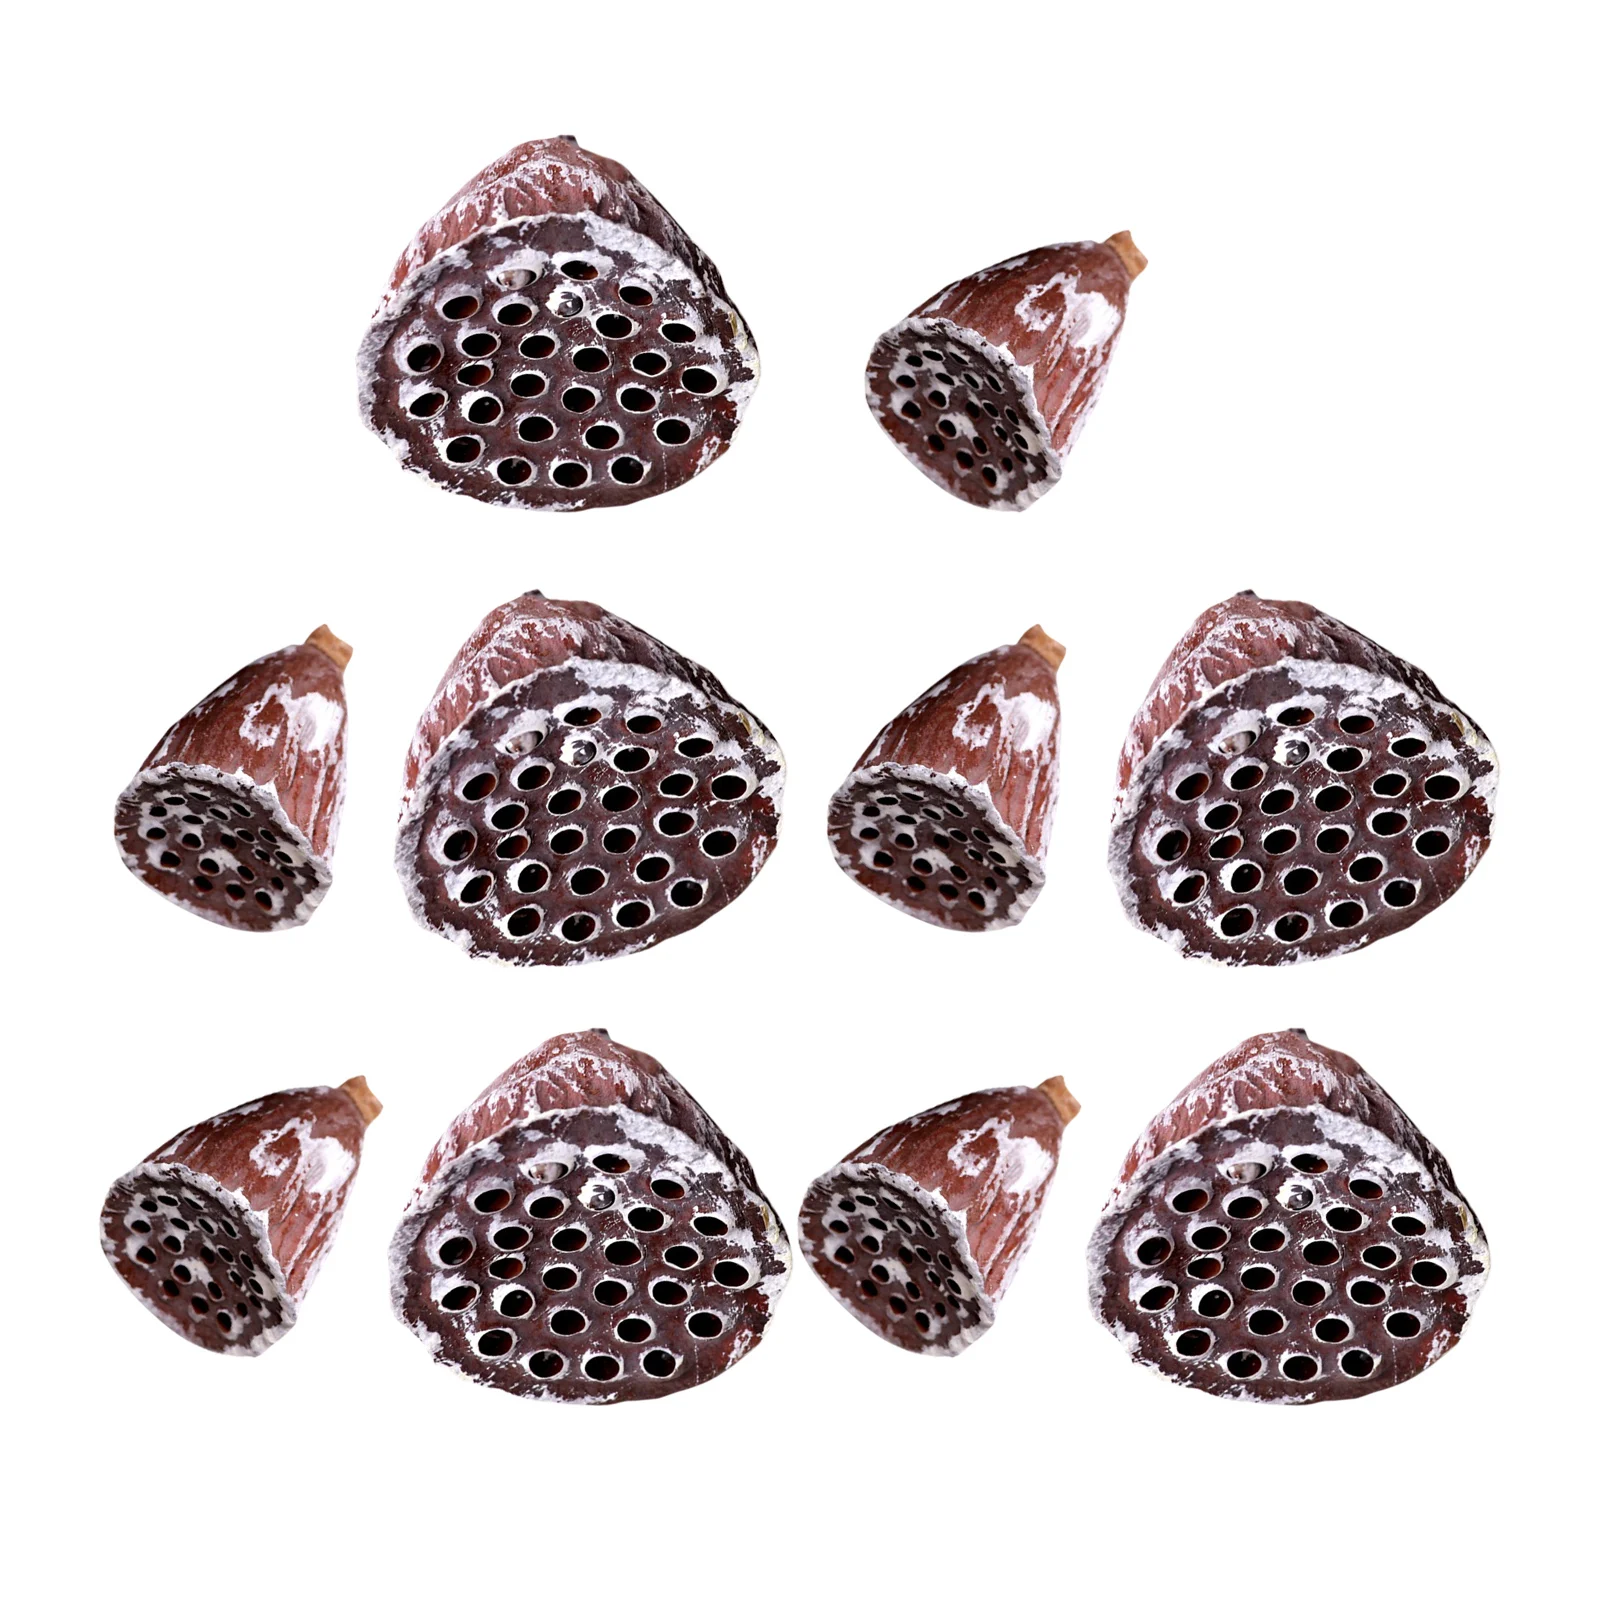 10pcs Natural Lotus Seedpods Flower Dried Lotus Pod Without Seed for Home Wedding Thanksgiving Christmas Autumn Decoration